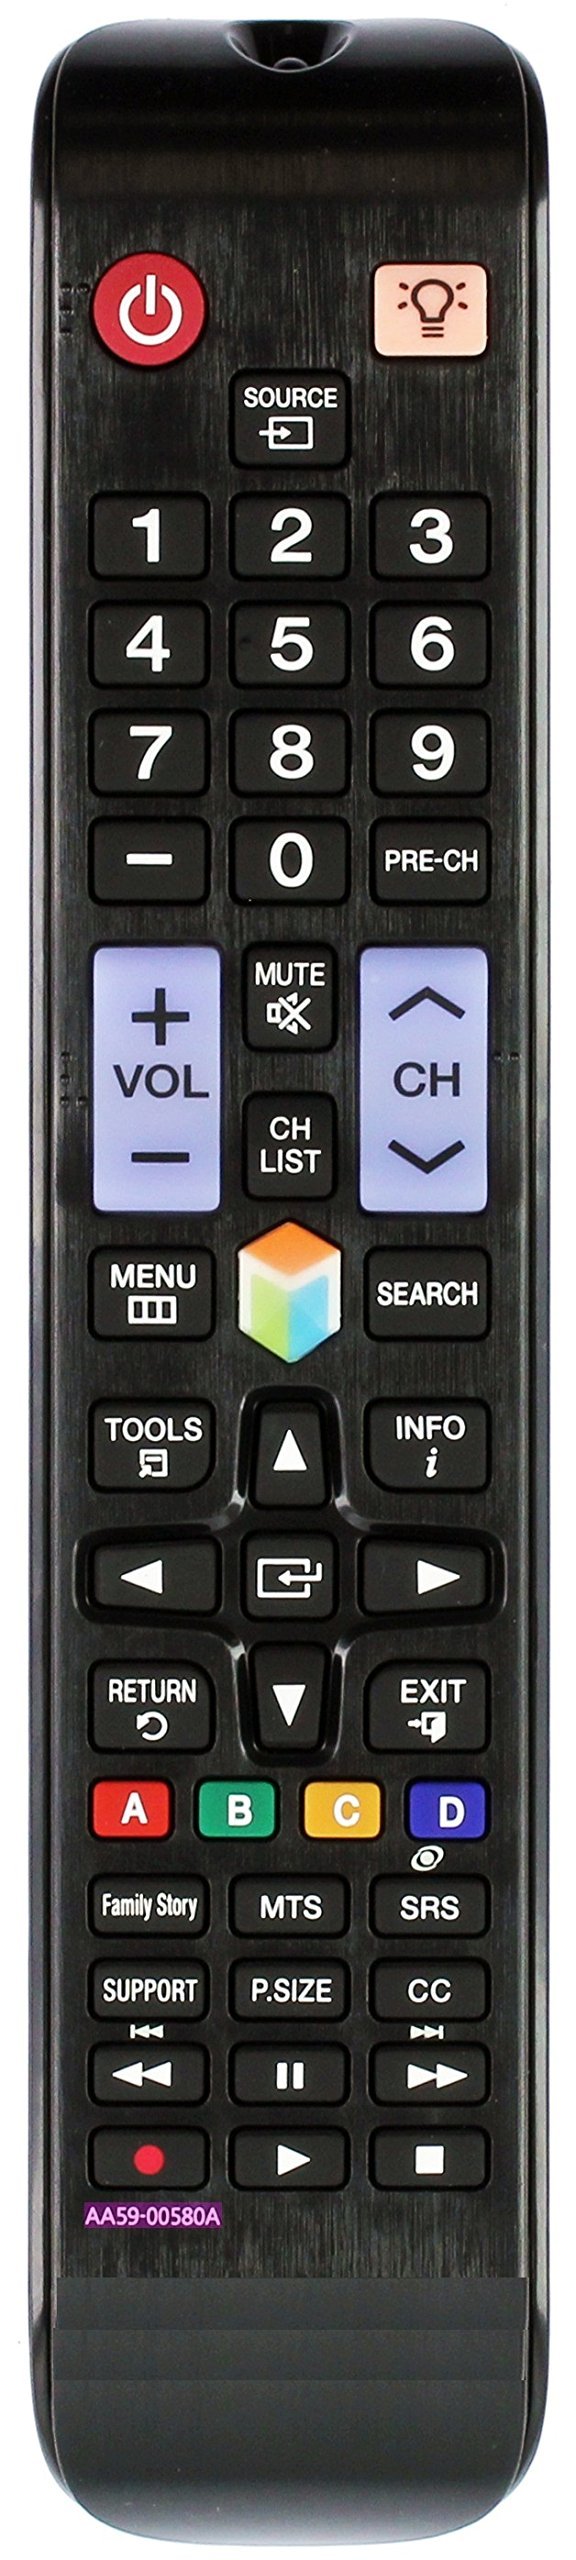 AA59-00580A Replace Remote Fit for Samsung UN32EH5300 UN32EH5300F UN32EH5300FXZA UN40EH5300F UN40ES6100F UN40ES6100FXZA UN40ES6150F UN46ES6100F UN46ES6150 UN46ES6150F UN50EH5300 LCD LED TV